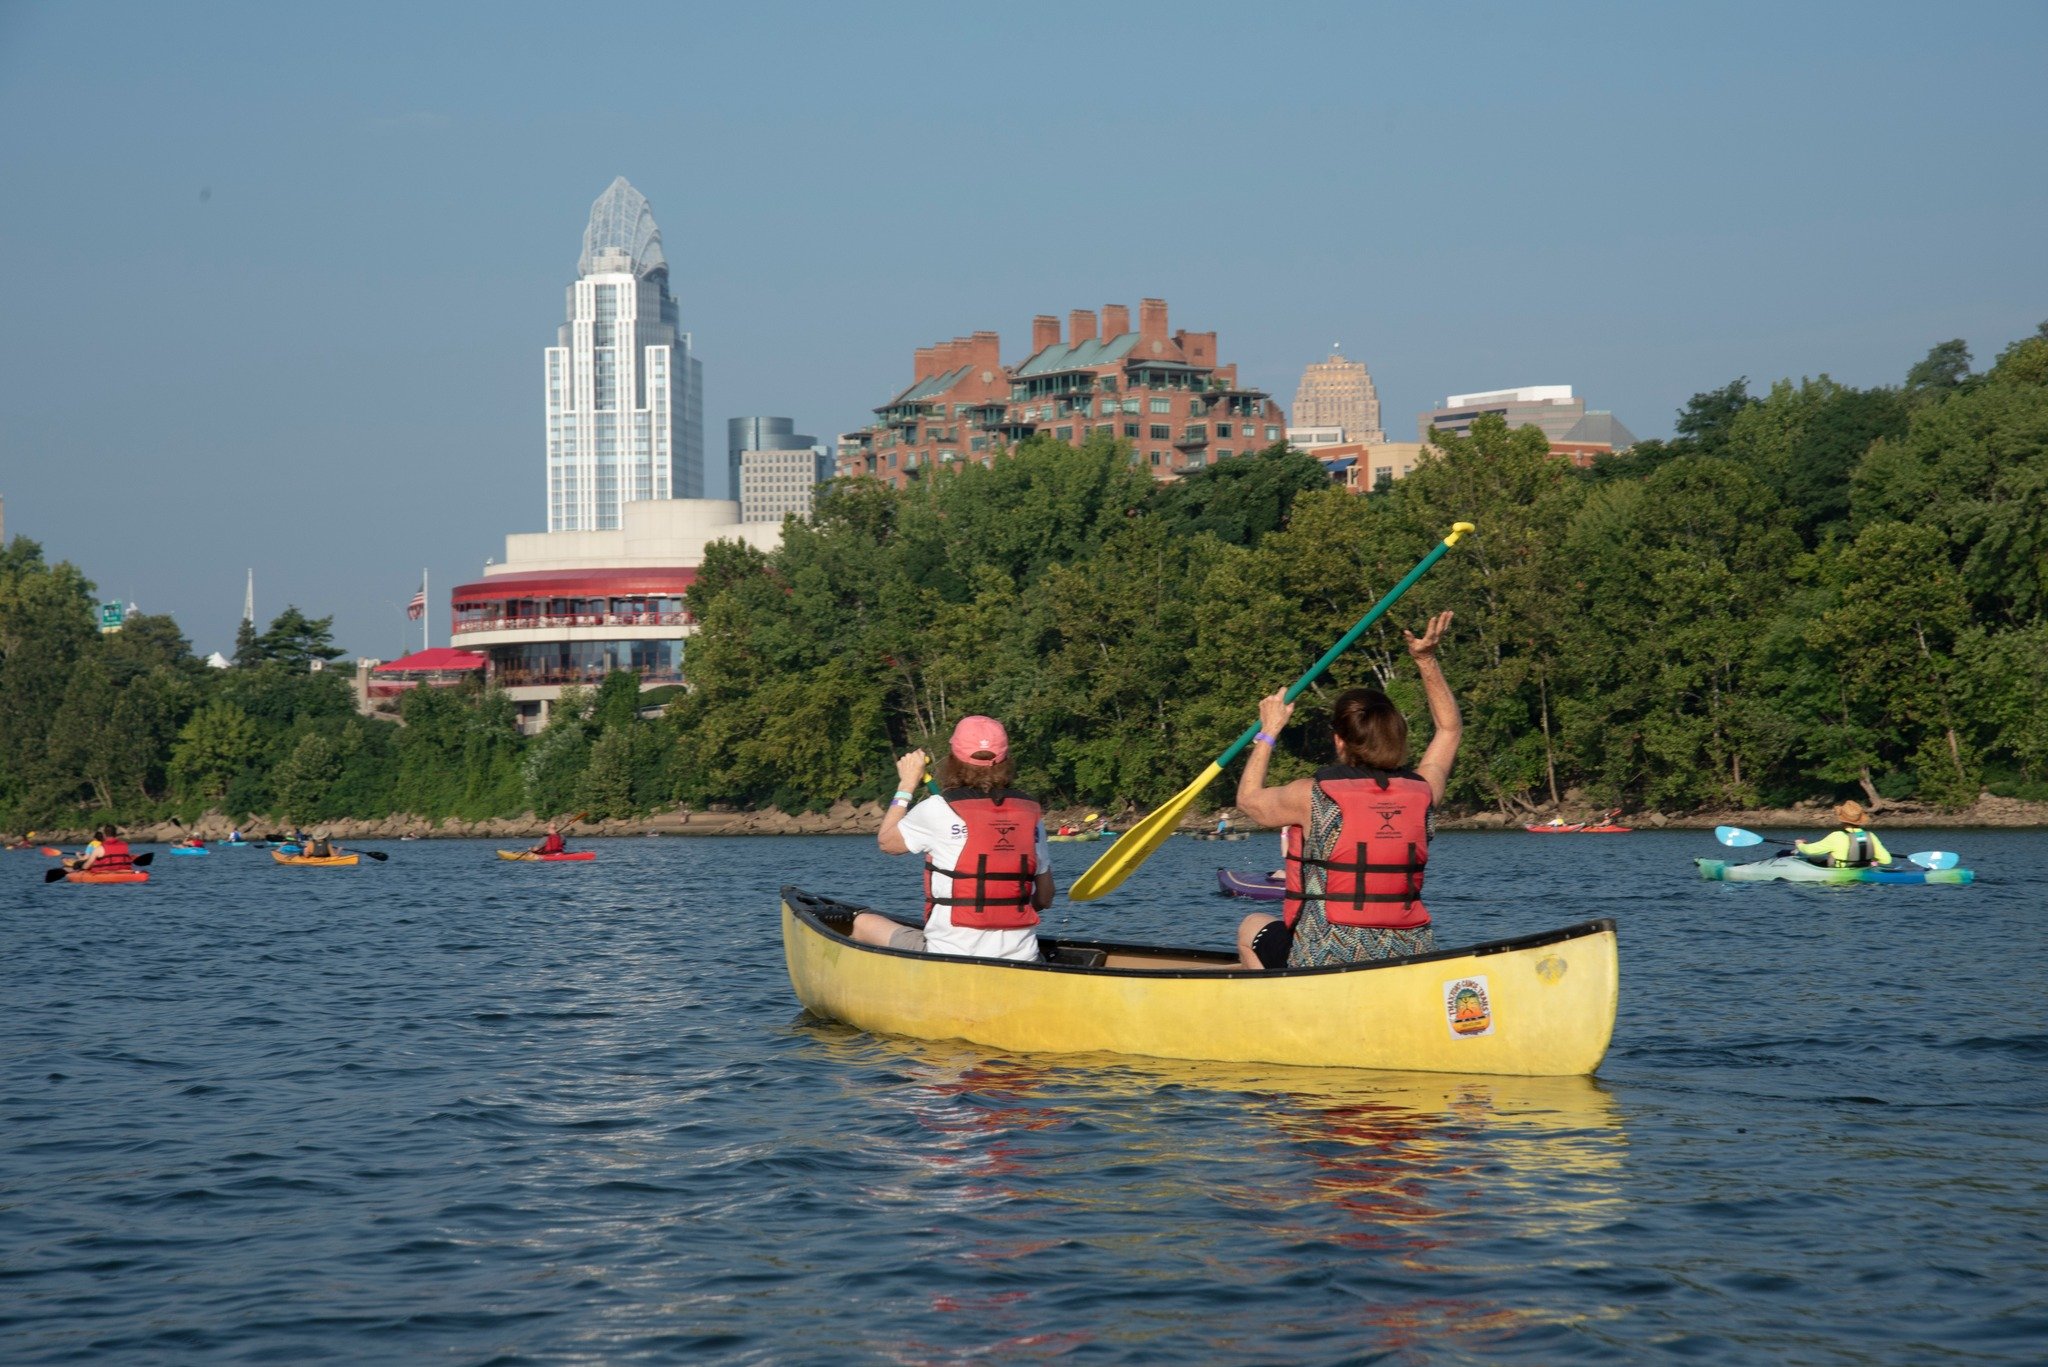 &quot;Early bird&quot; pricing for Ohio River Paddlefest ends Tuesday!
🚣💲
You only have a few more days to get the lowest rate for Ohio River Paddlefest, our largest community event of the year, scheduled for Saturday, August 3! Rates for both our 